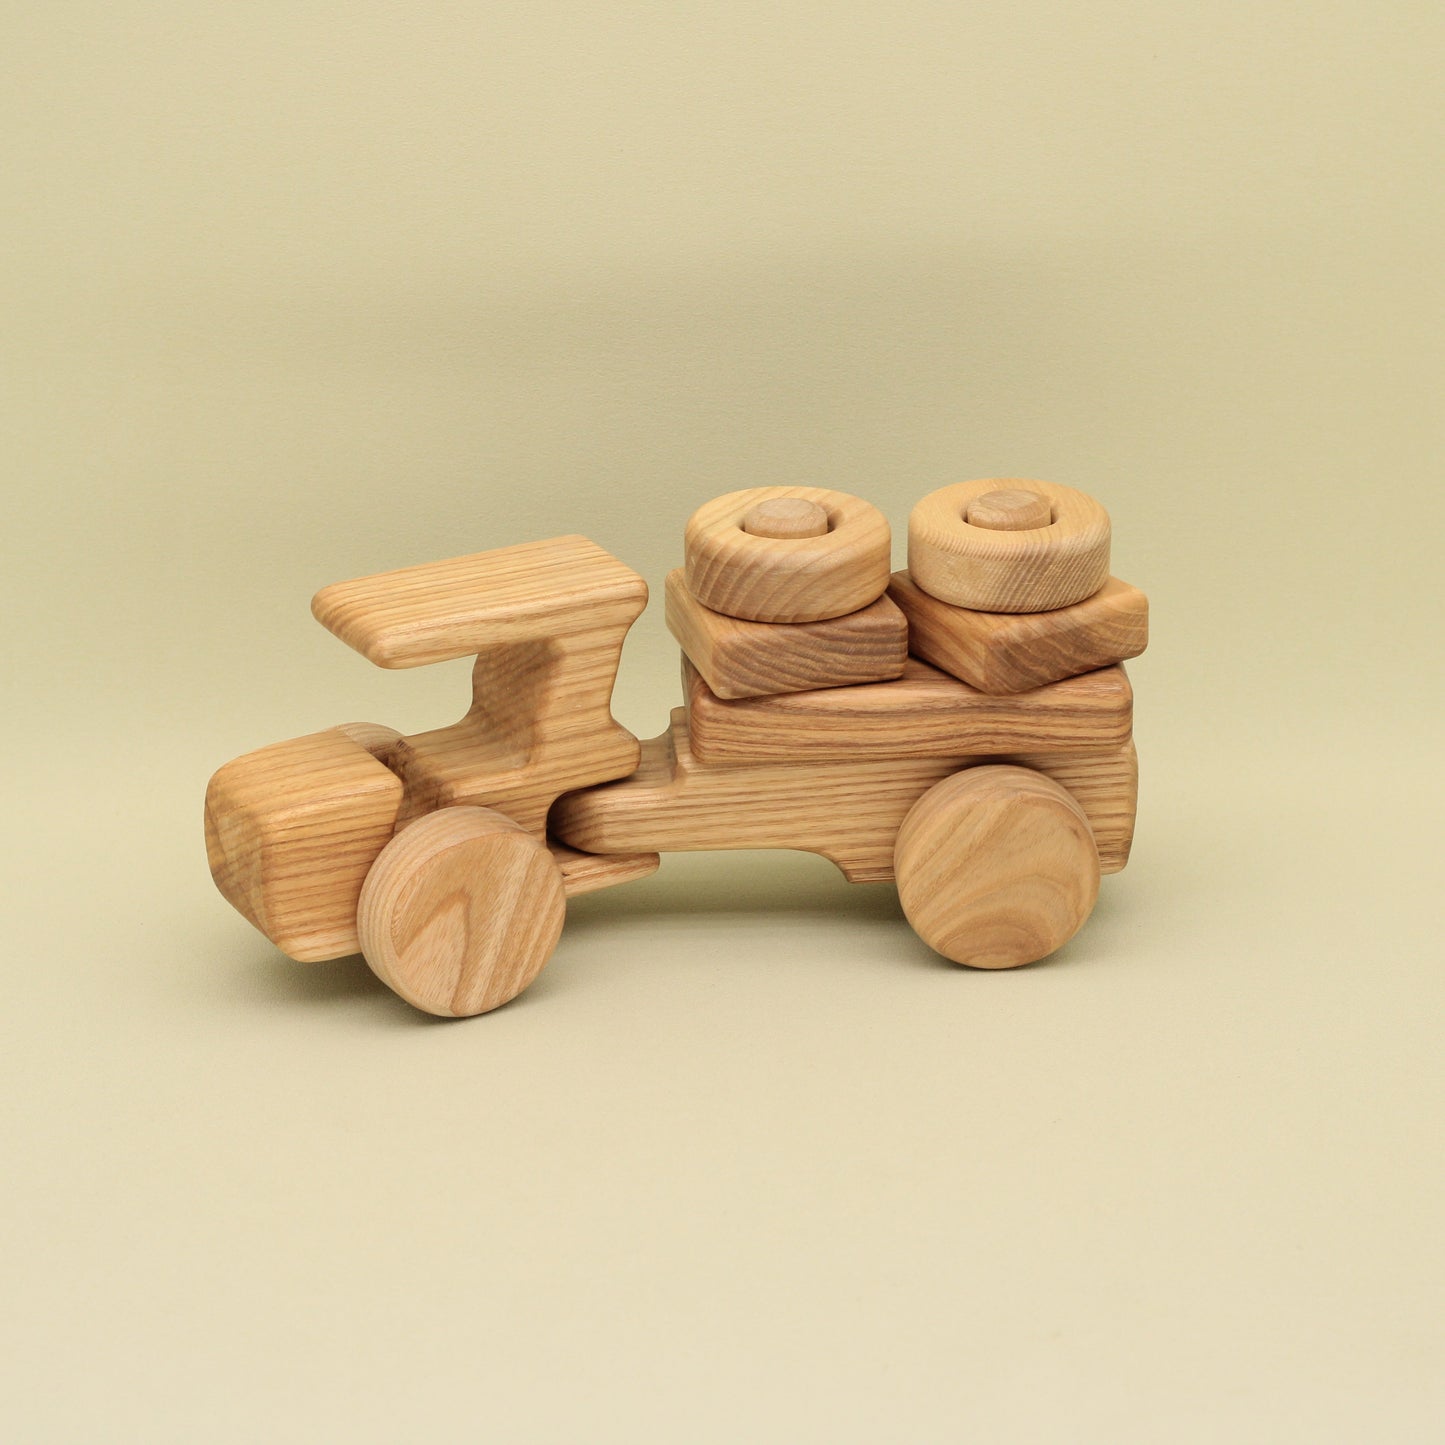 Lotes Toys Wooden Construction Vehicles Car BT22